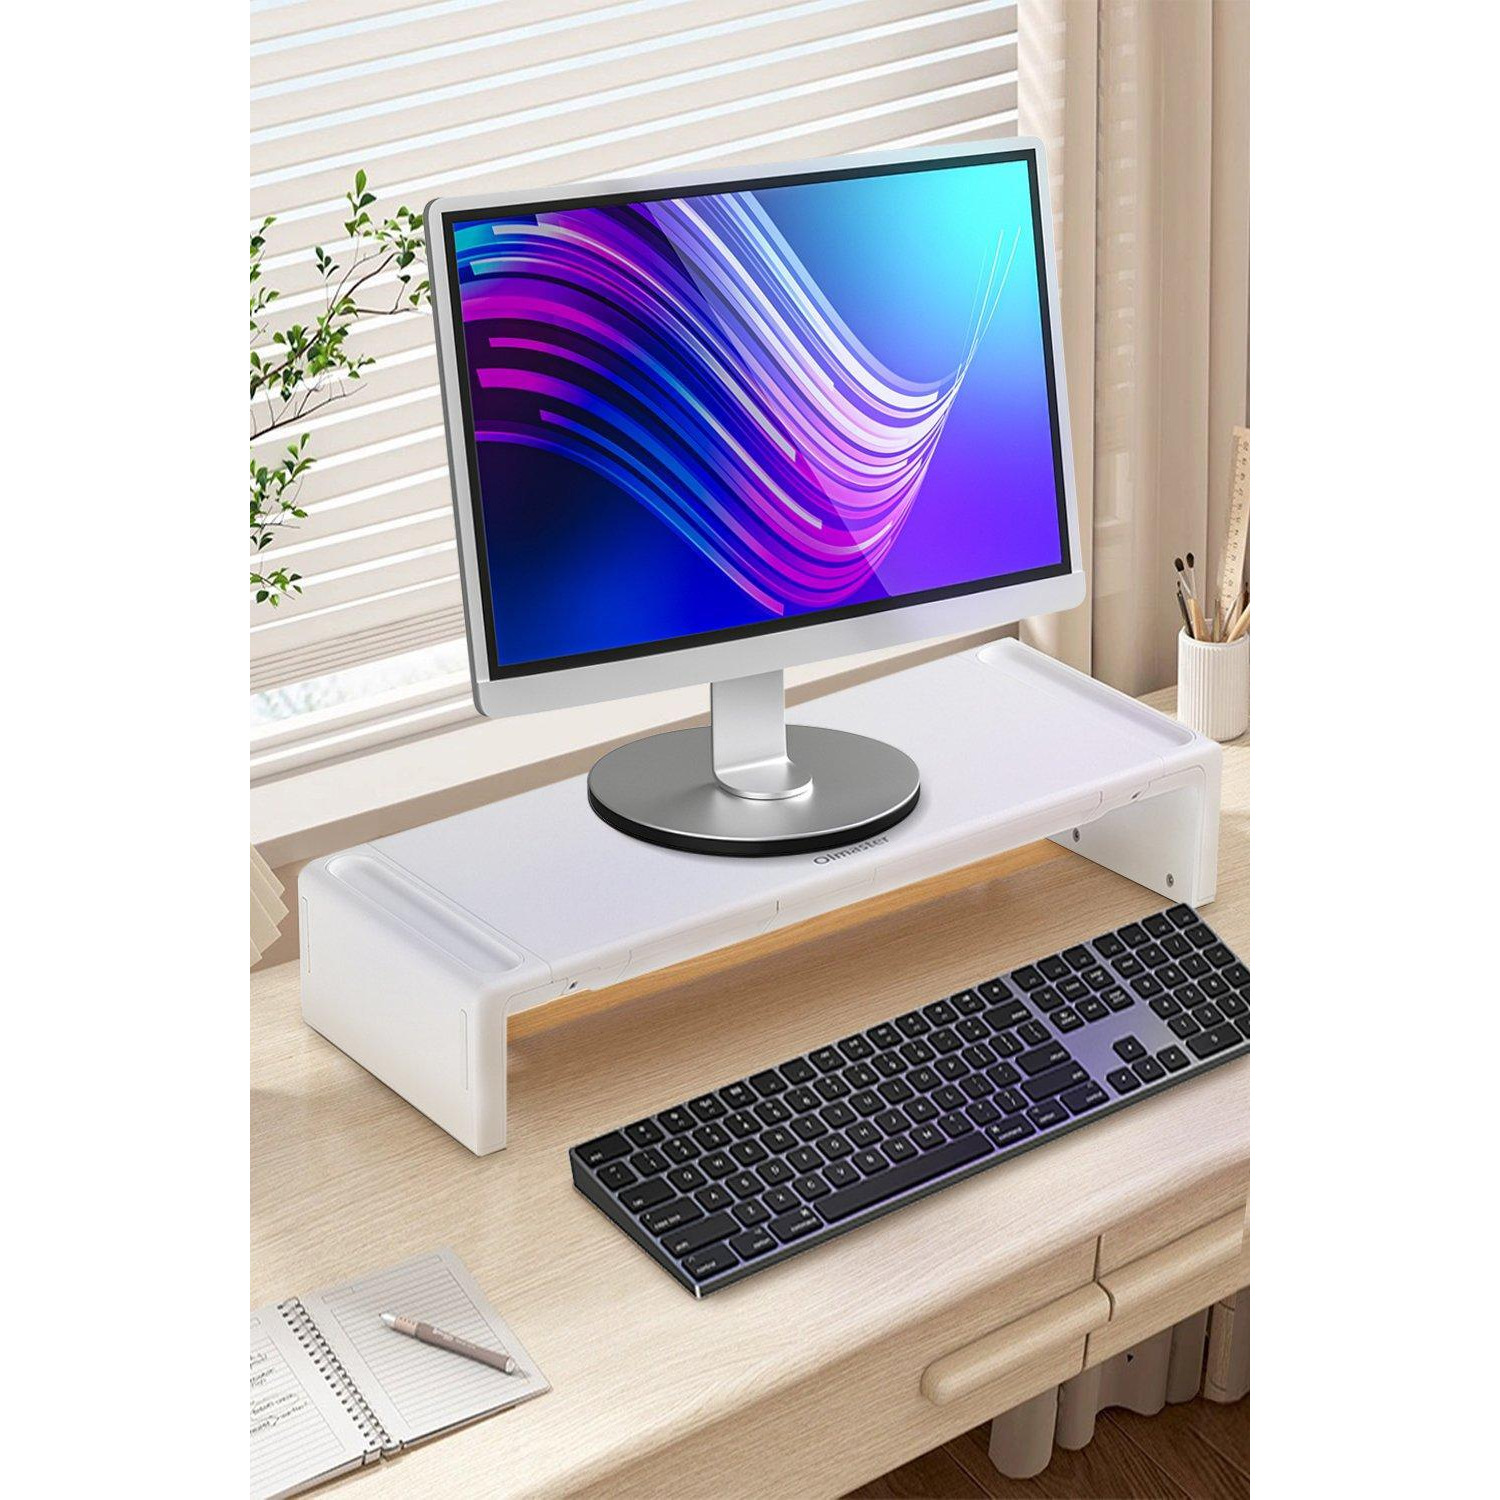 Adjustable Multi-Functional Computer Monitor Stand - image 1